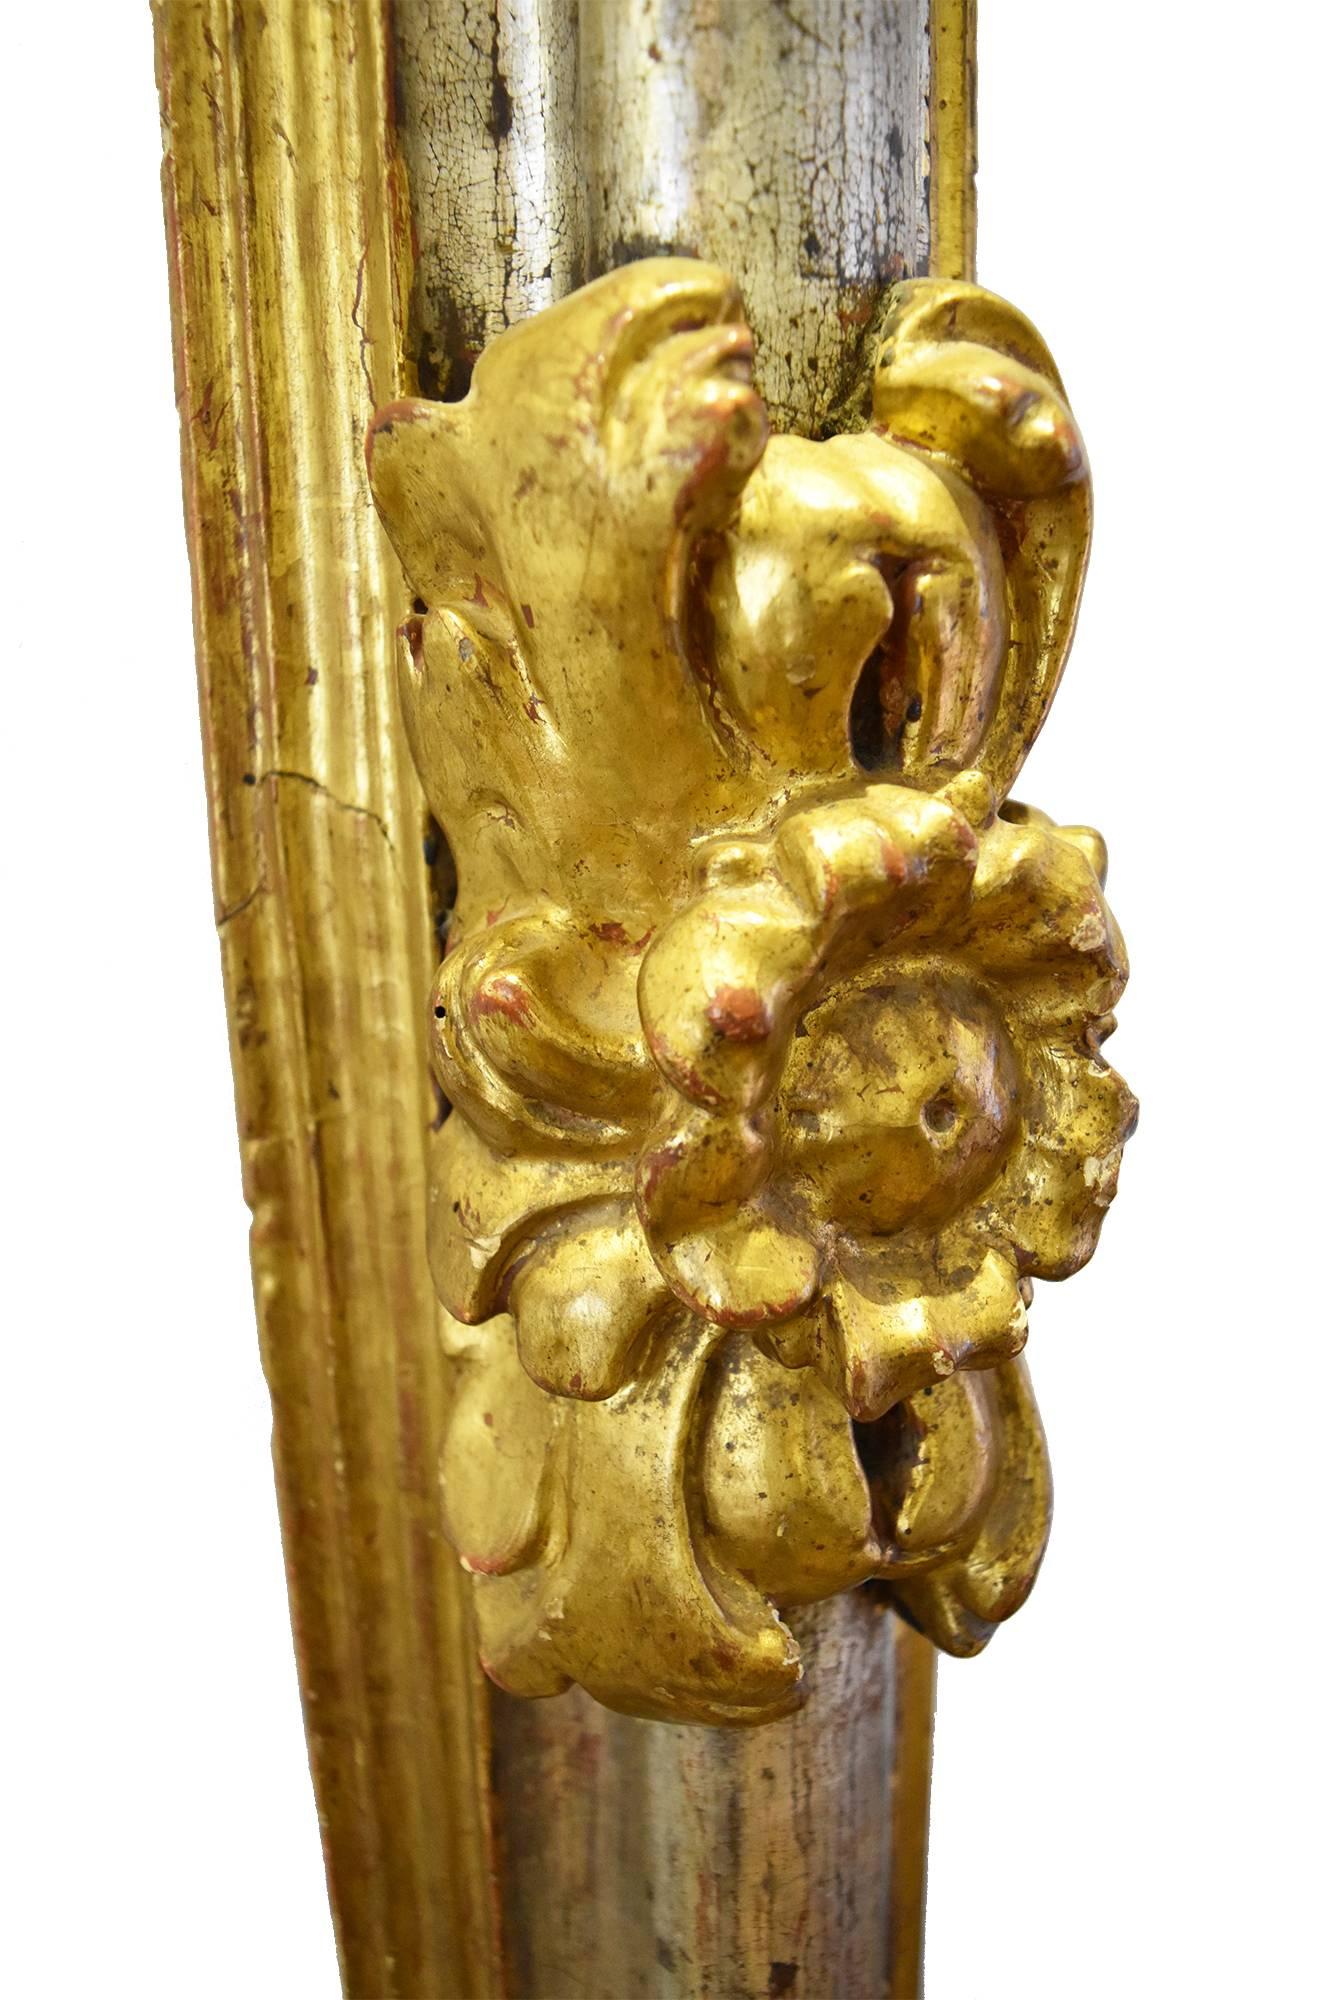 Baroque ornamental and floral decorations. Gilding technique required gold and silver leaf.